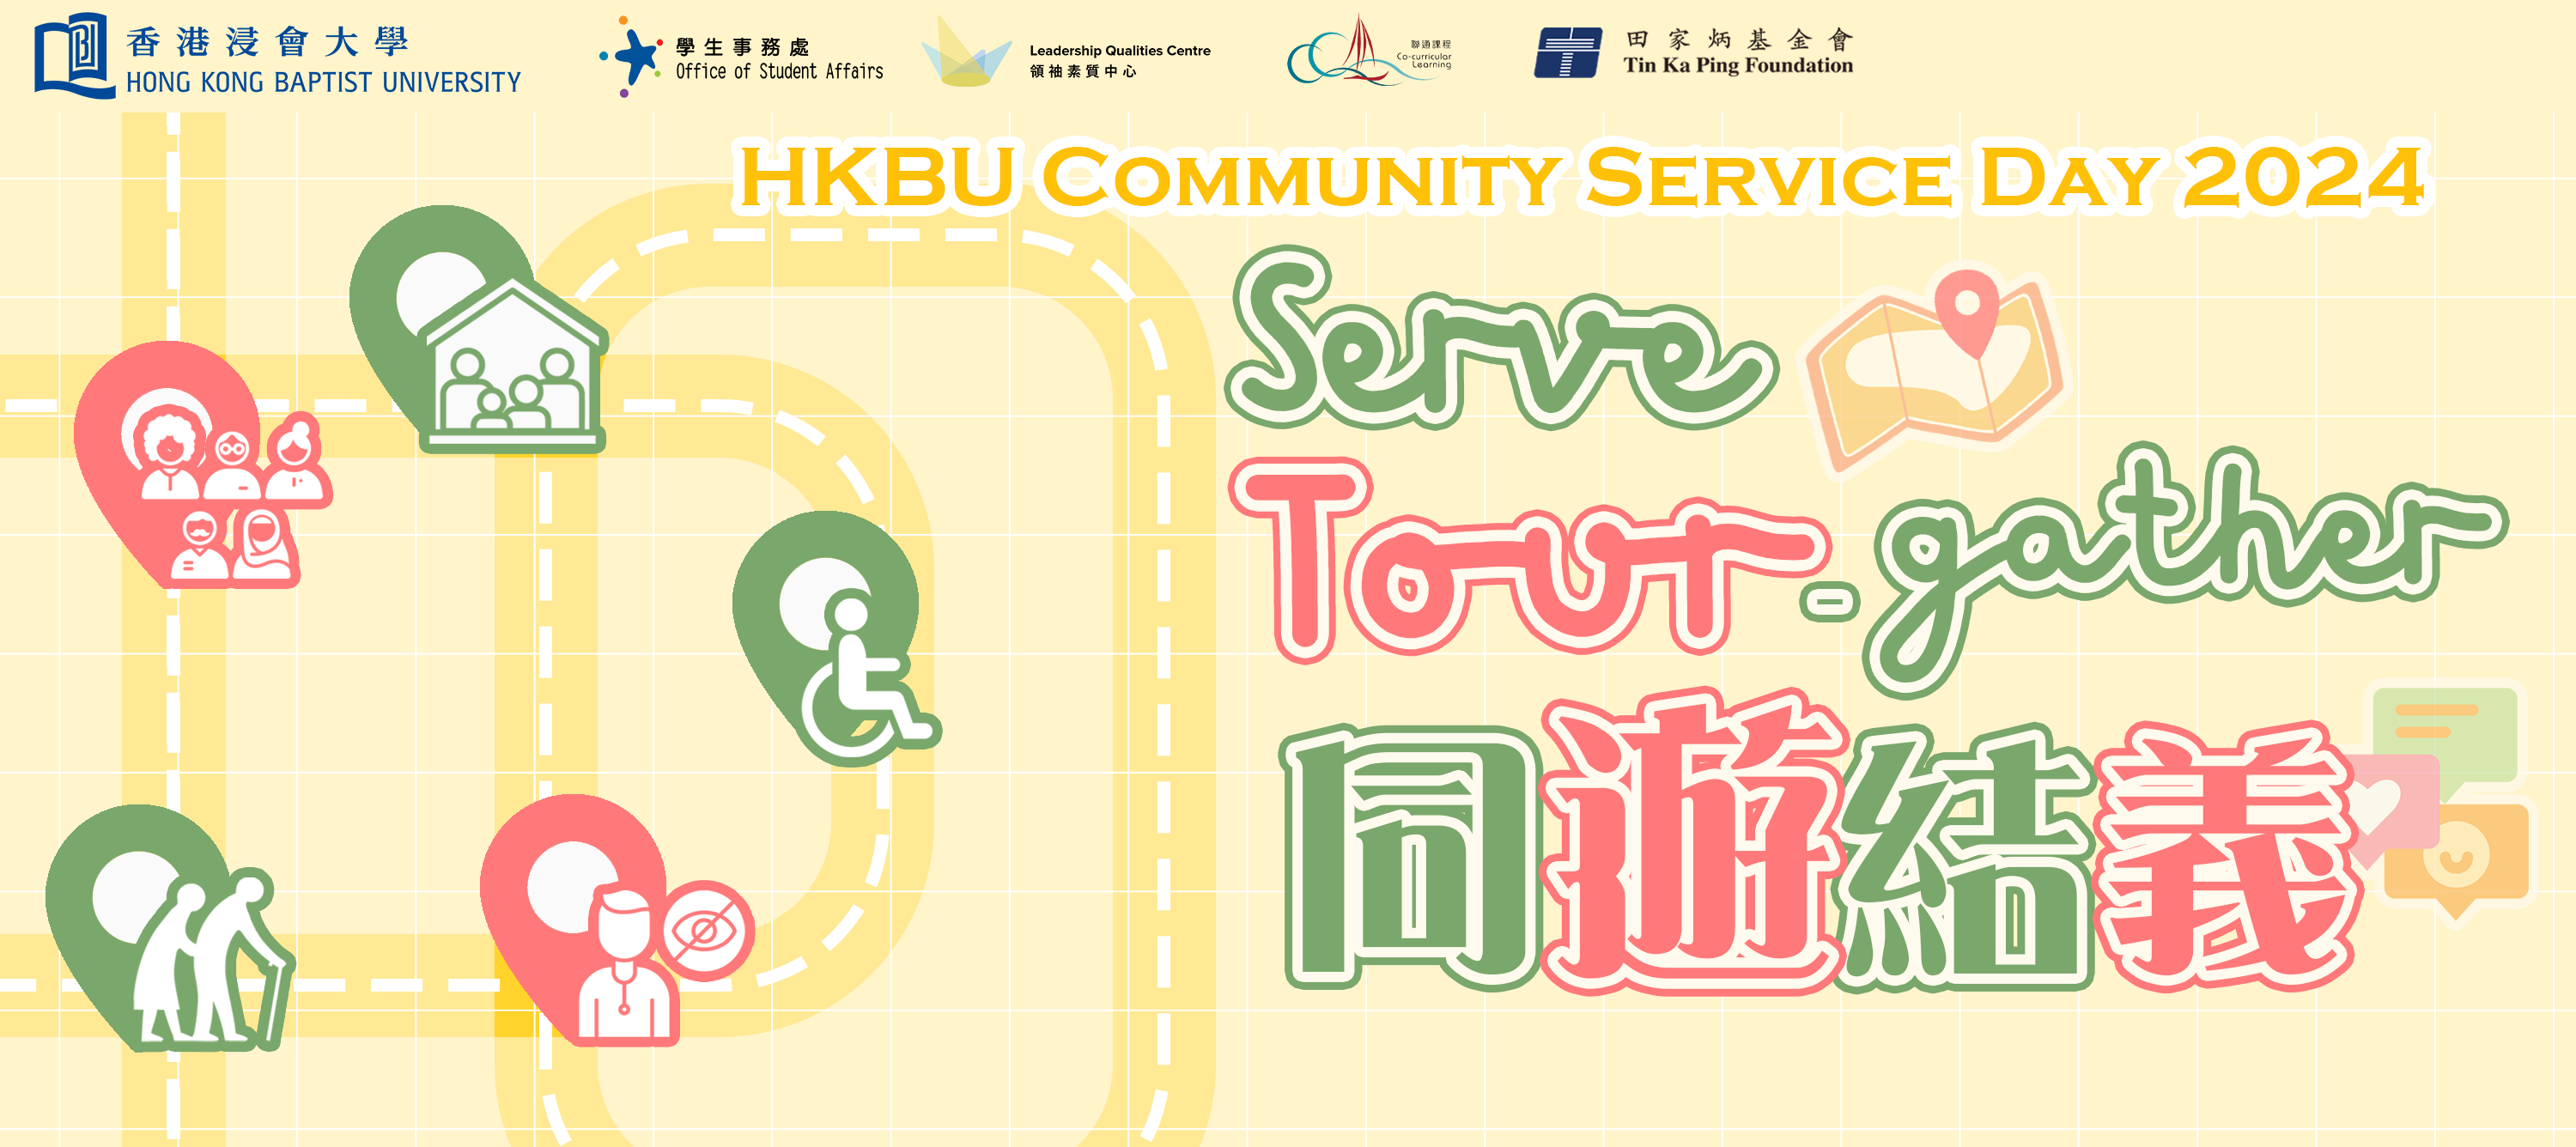 HKBU Community Service Day 2023 Serve Tour-Gather 同遊結義.The programme is organised by HKBU Leadership Qualities Centre, Office of Student Affairs and supported by the Tin Ka Ping Foundation. 香港浸會大學學生事務處領袖素質中心主辦、田家炳基金會贊助